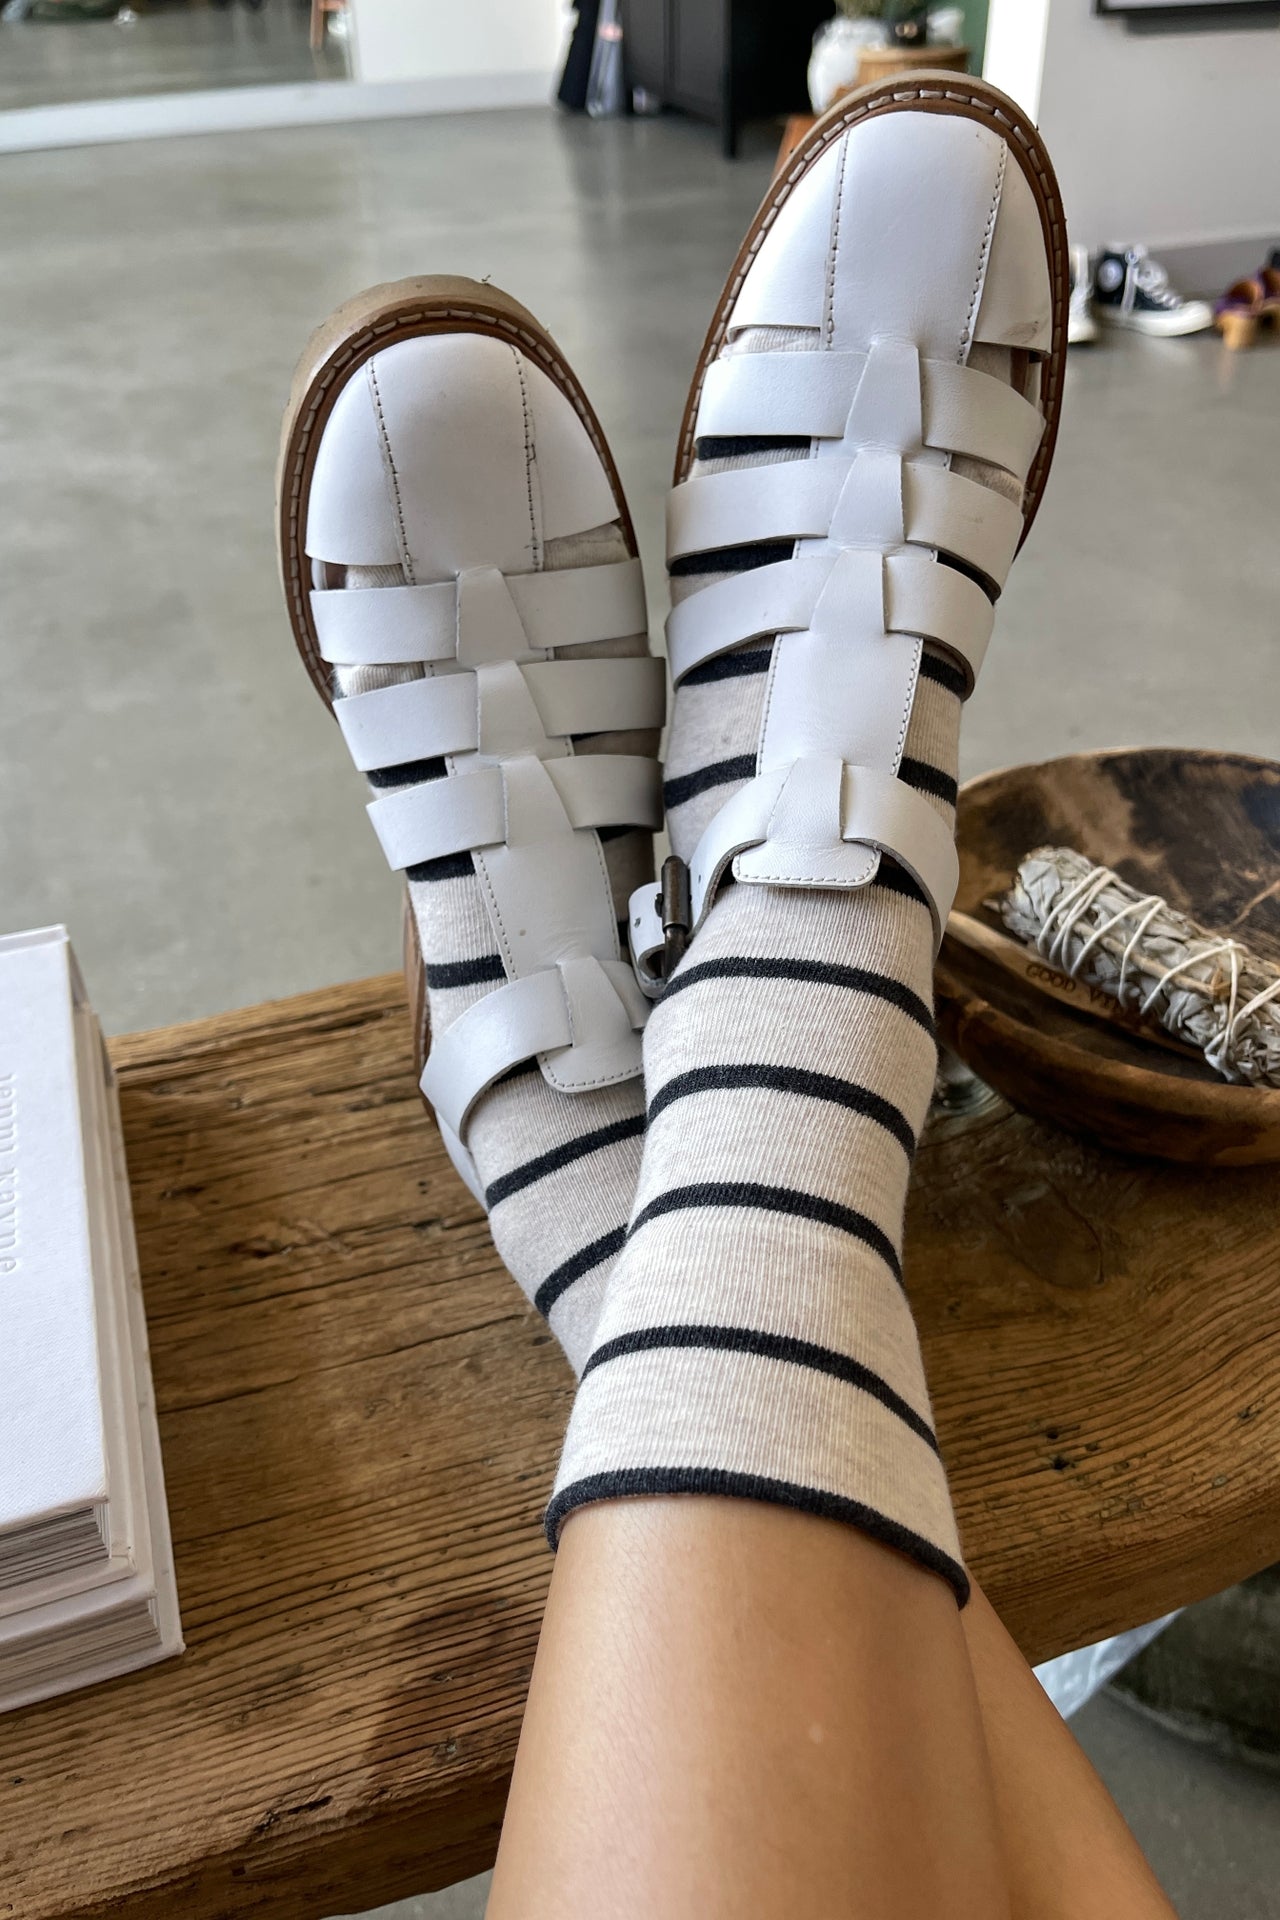 Le Bon Shoppe Wally Socks are made from a breathable cotton blend.